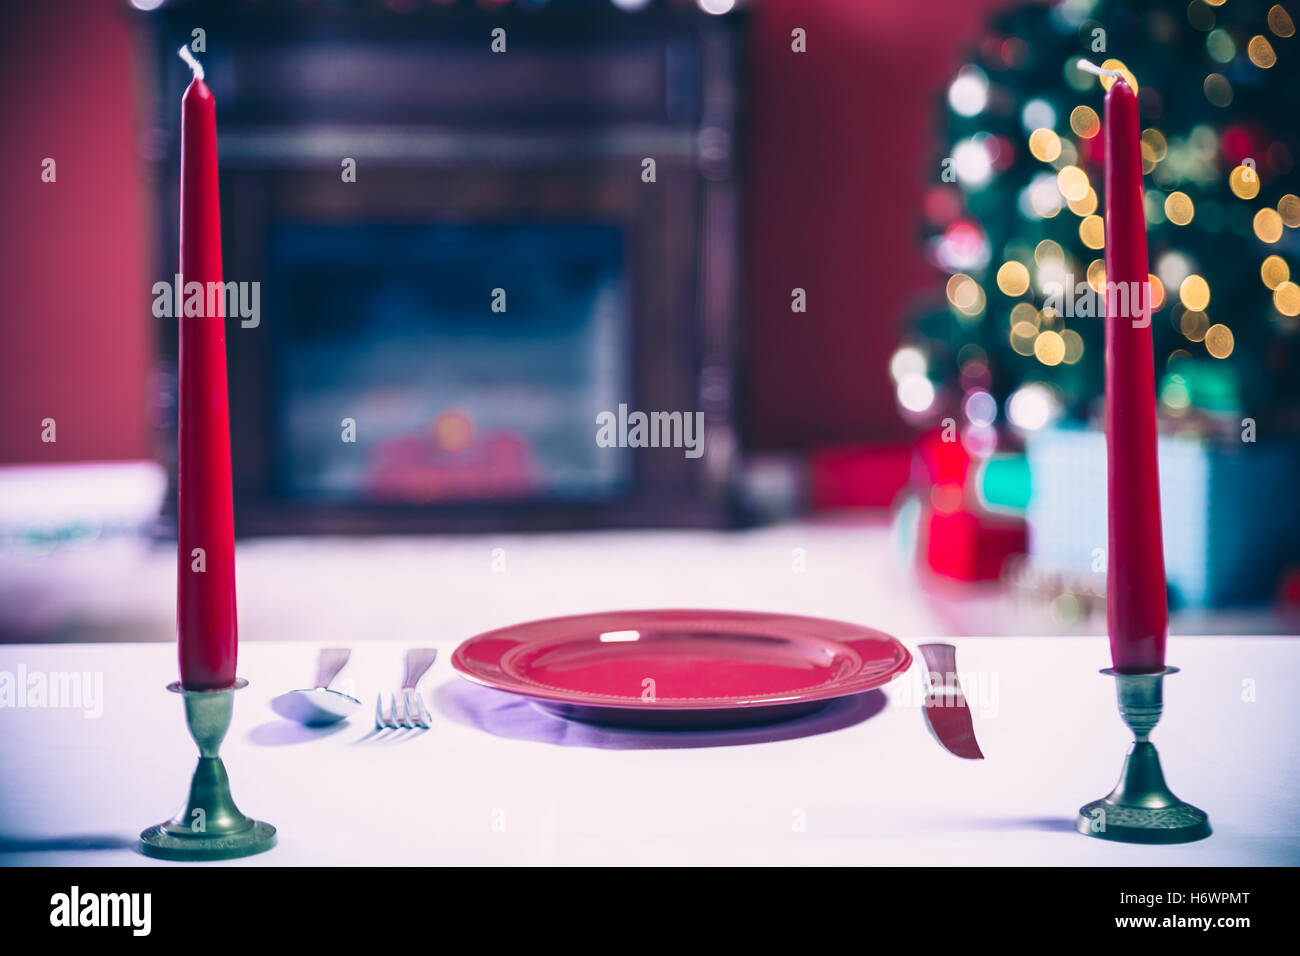 Beautifully laid new year table with red plates and Cutlery on a background of decorated room with Christmas tree and fireplace Stock Photo